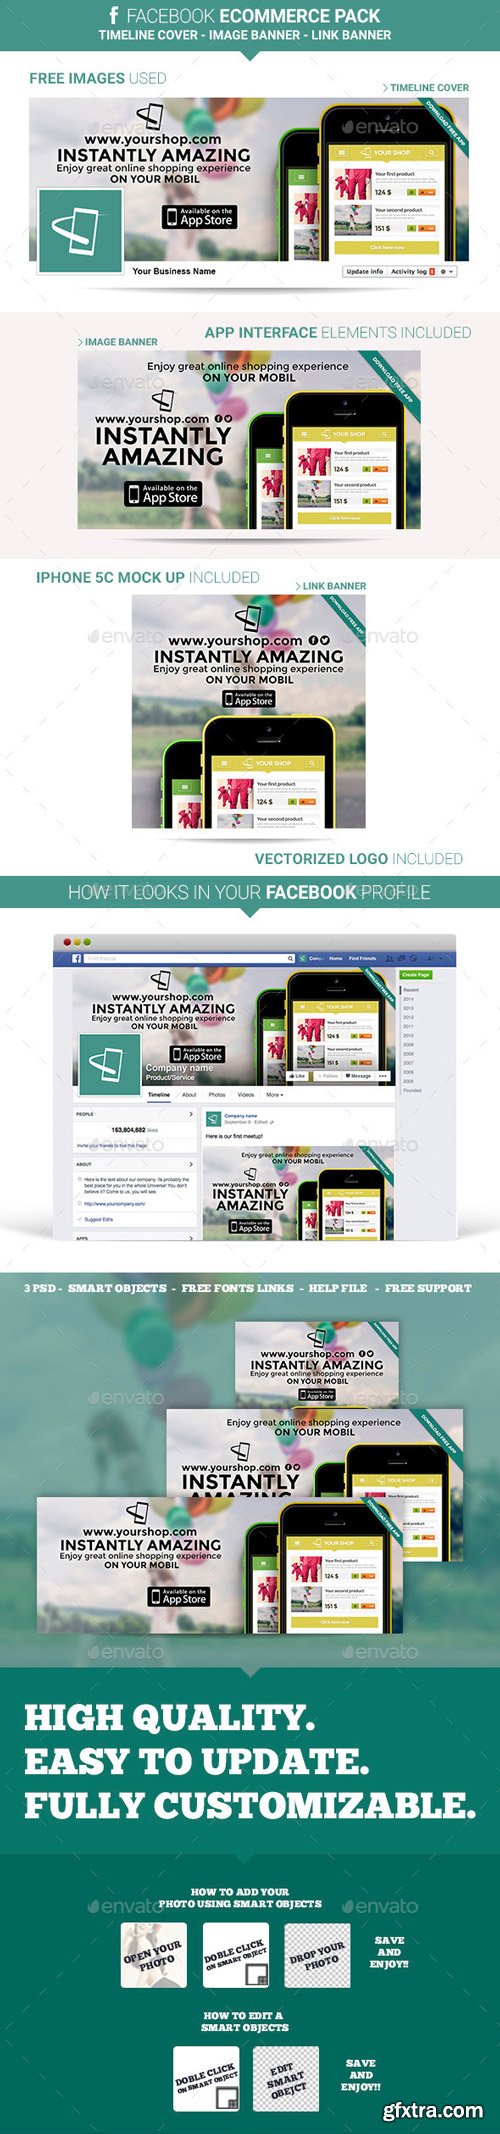 GraphicRiver - Facebook Ecommerce Pack